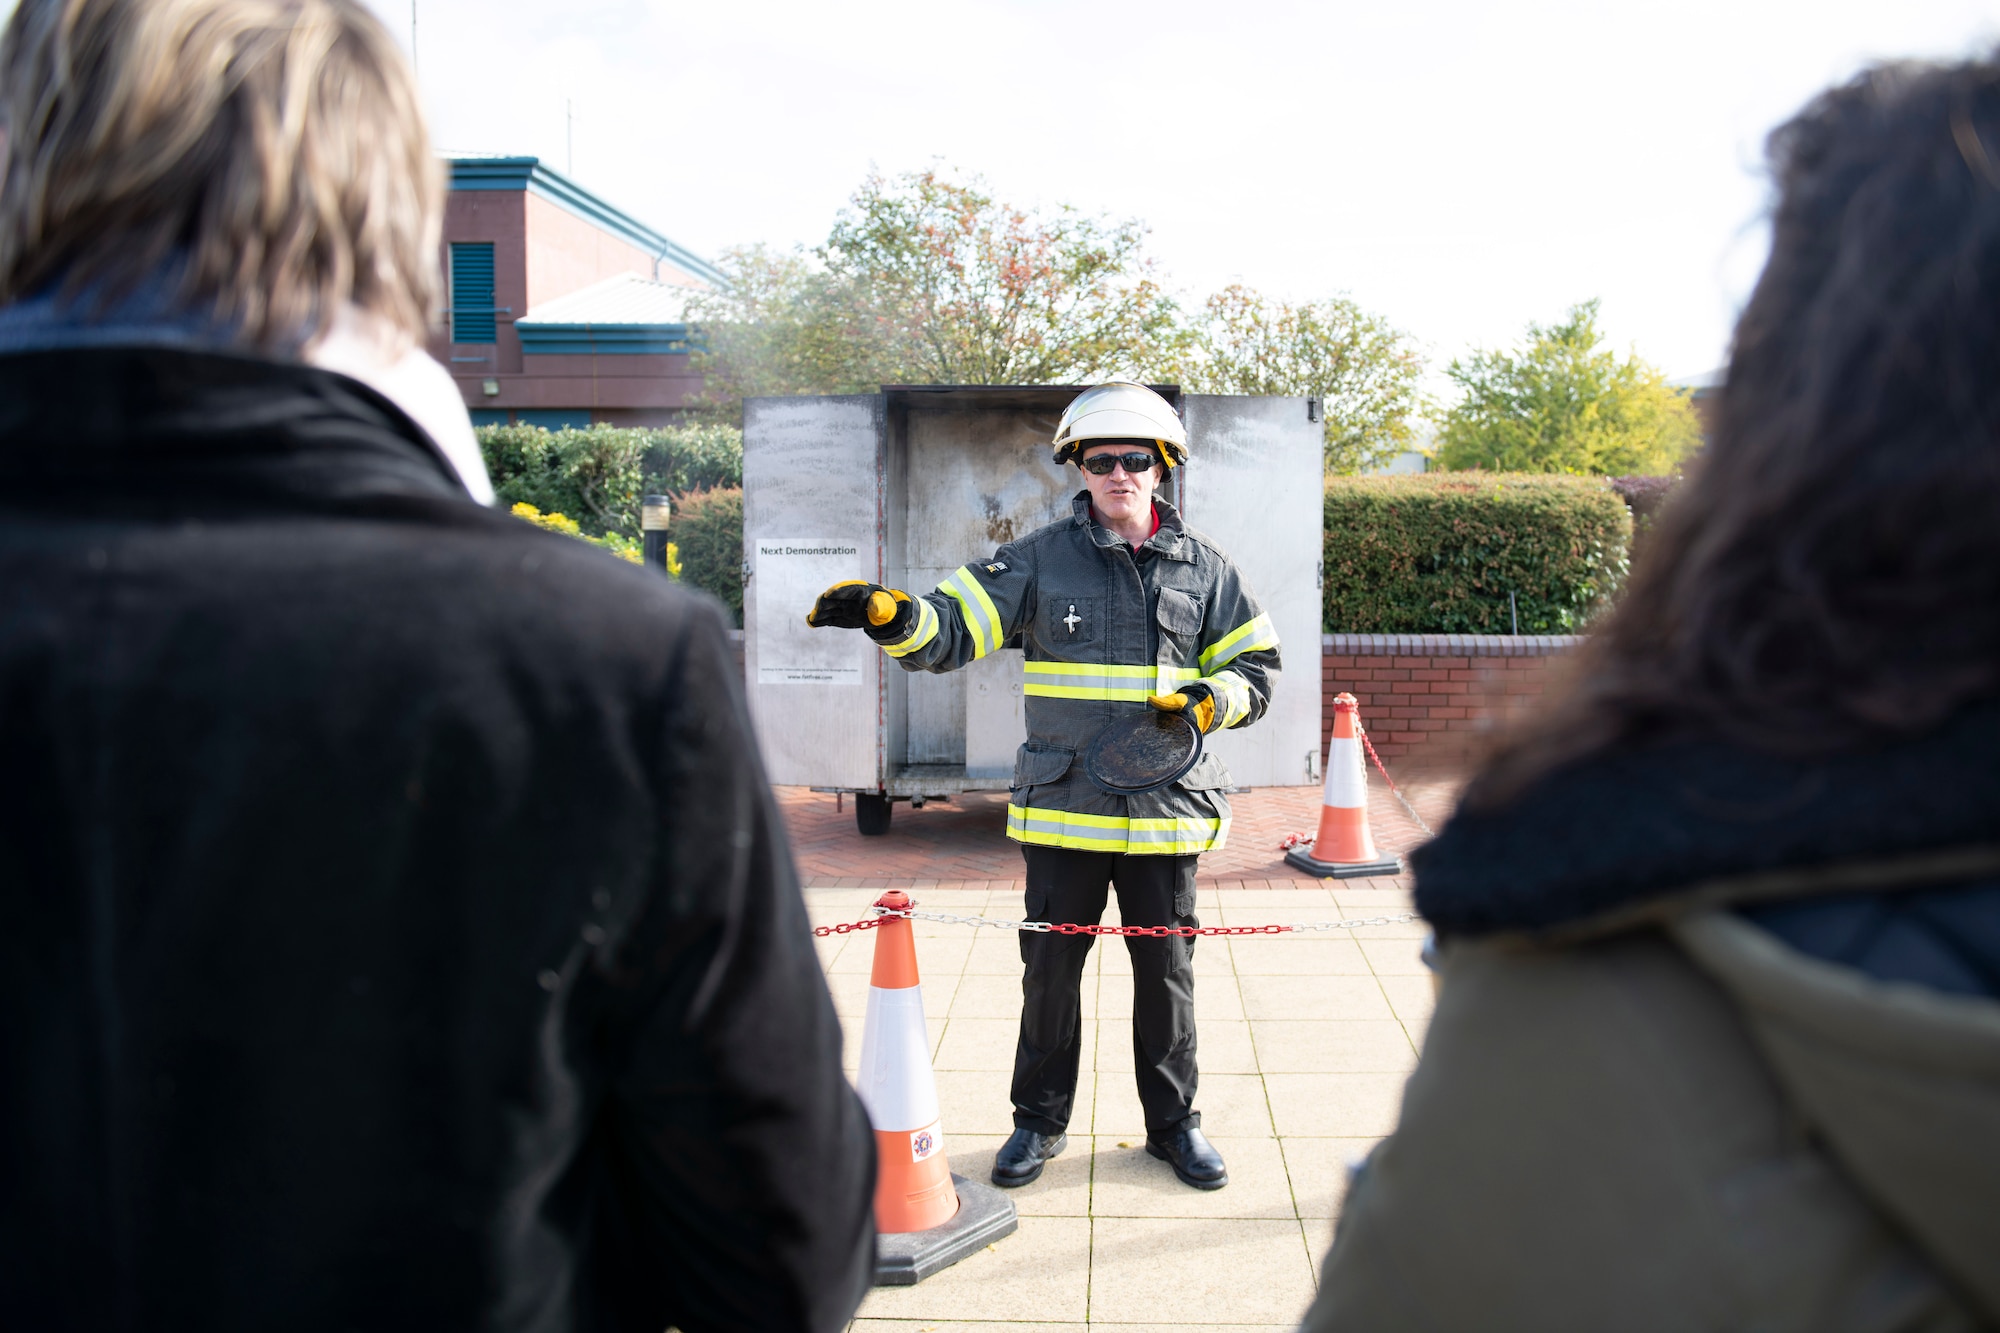 Dave Herman, 423rd Civil Engineer Squadron assistant chief of fire prevention, talks about kitchen fire safety with a grease fire demonstration at RAF Molesworth, England, Oct. 6, 2020 during Fire Prevention Week 2020. Herman showed that placing a lid on a fire is safer than pouring water, especially on a grease fire, which can ignite into large flames. (U.S. Air Force photo by Senior Airman Jennifer Zima)